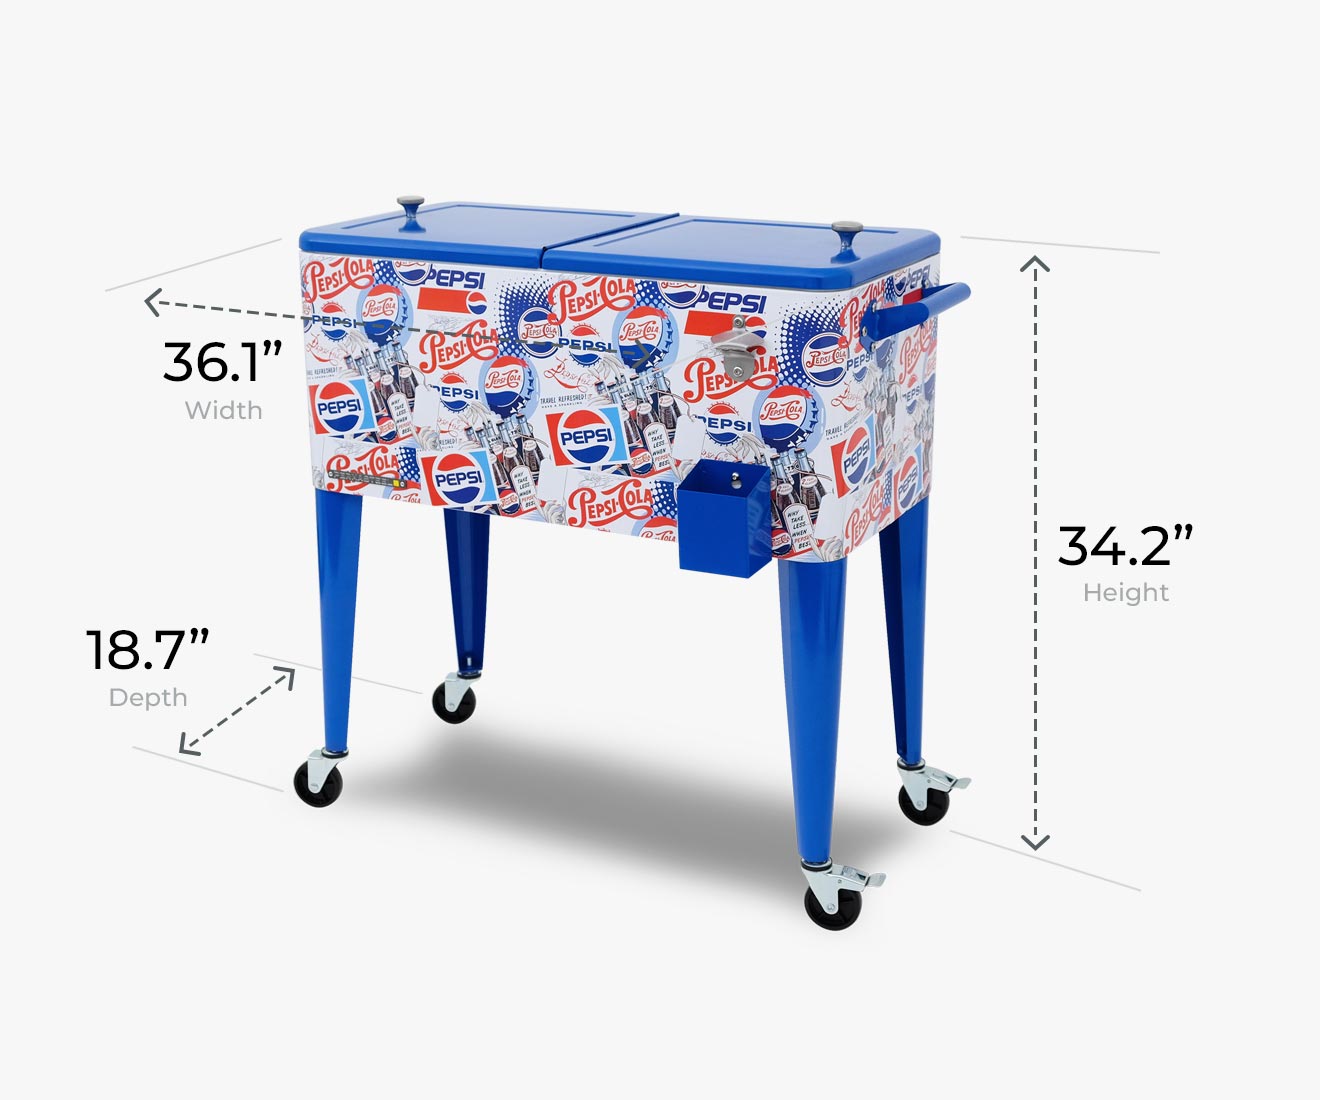 Pepsi 80-Quart Officially Licensed Patio Cooler by Permasteel Product Features Image 1